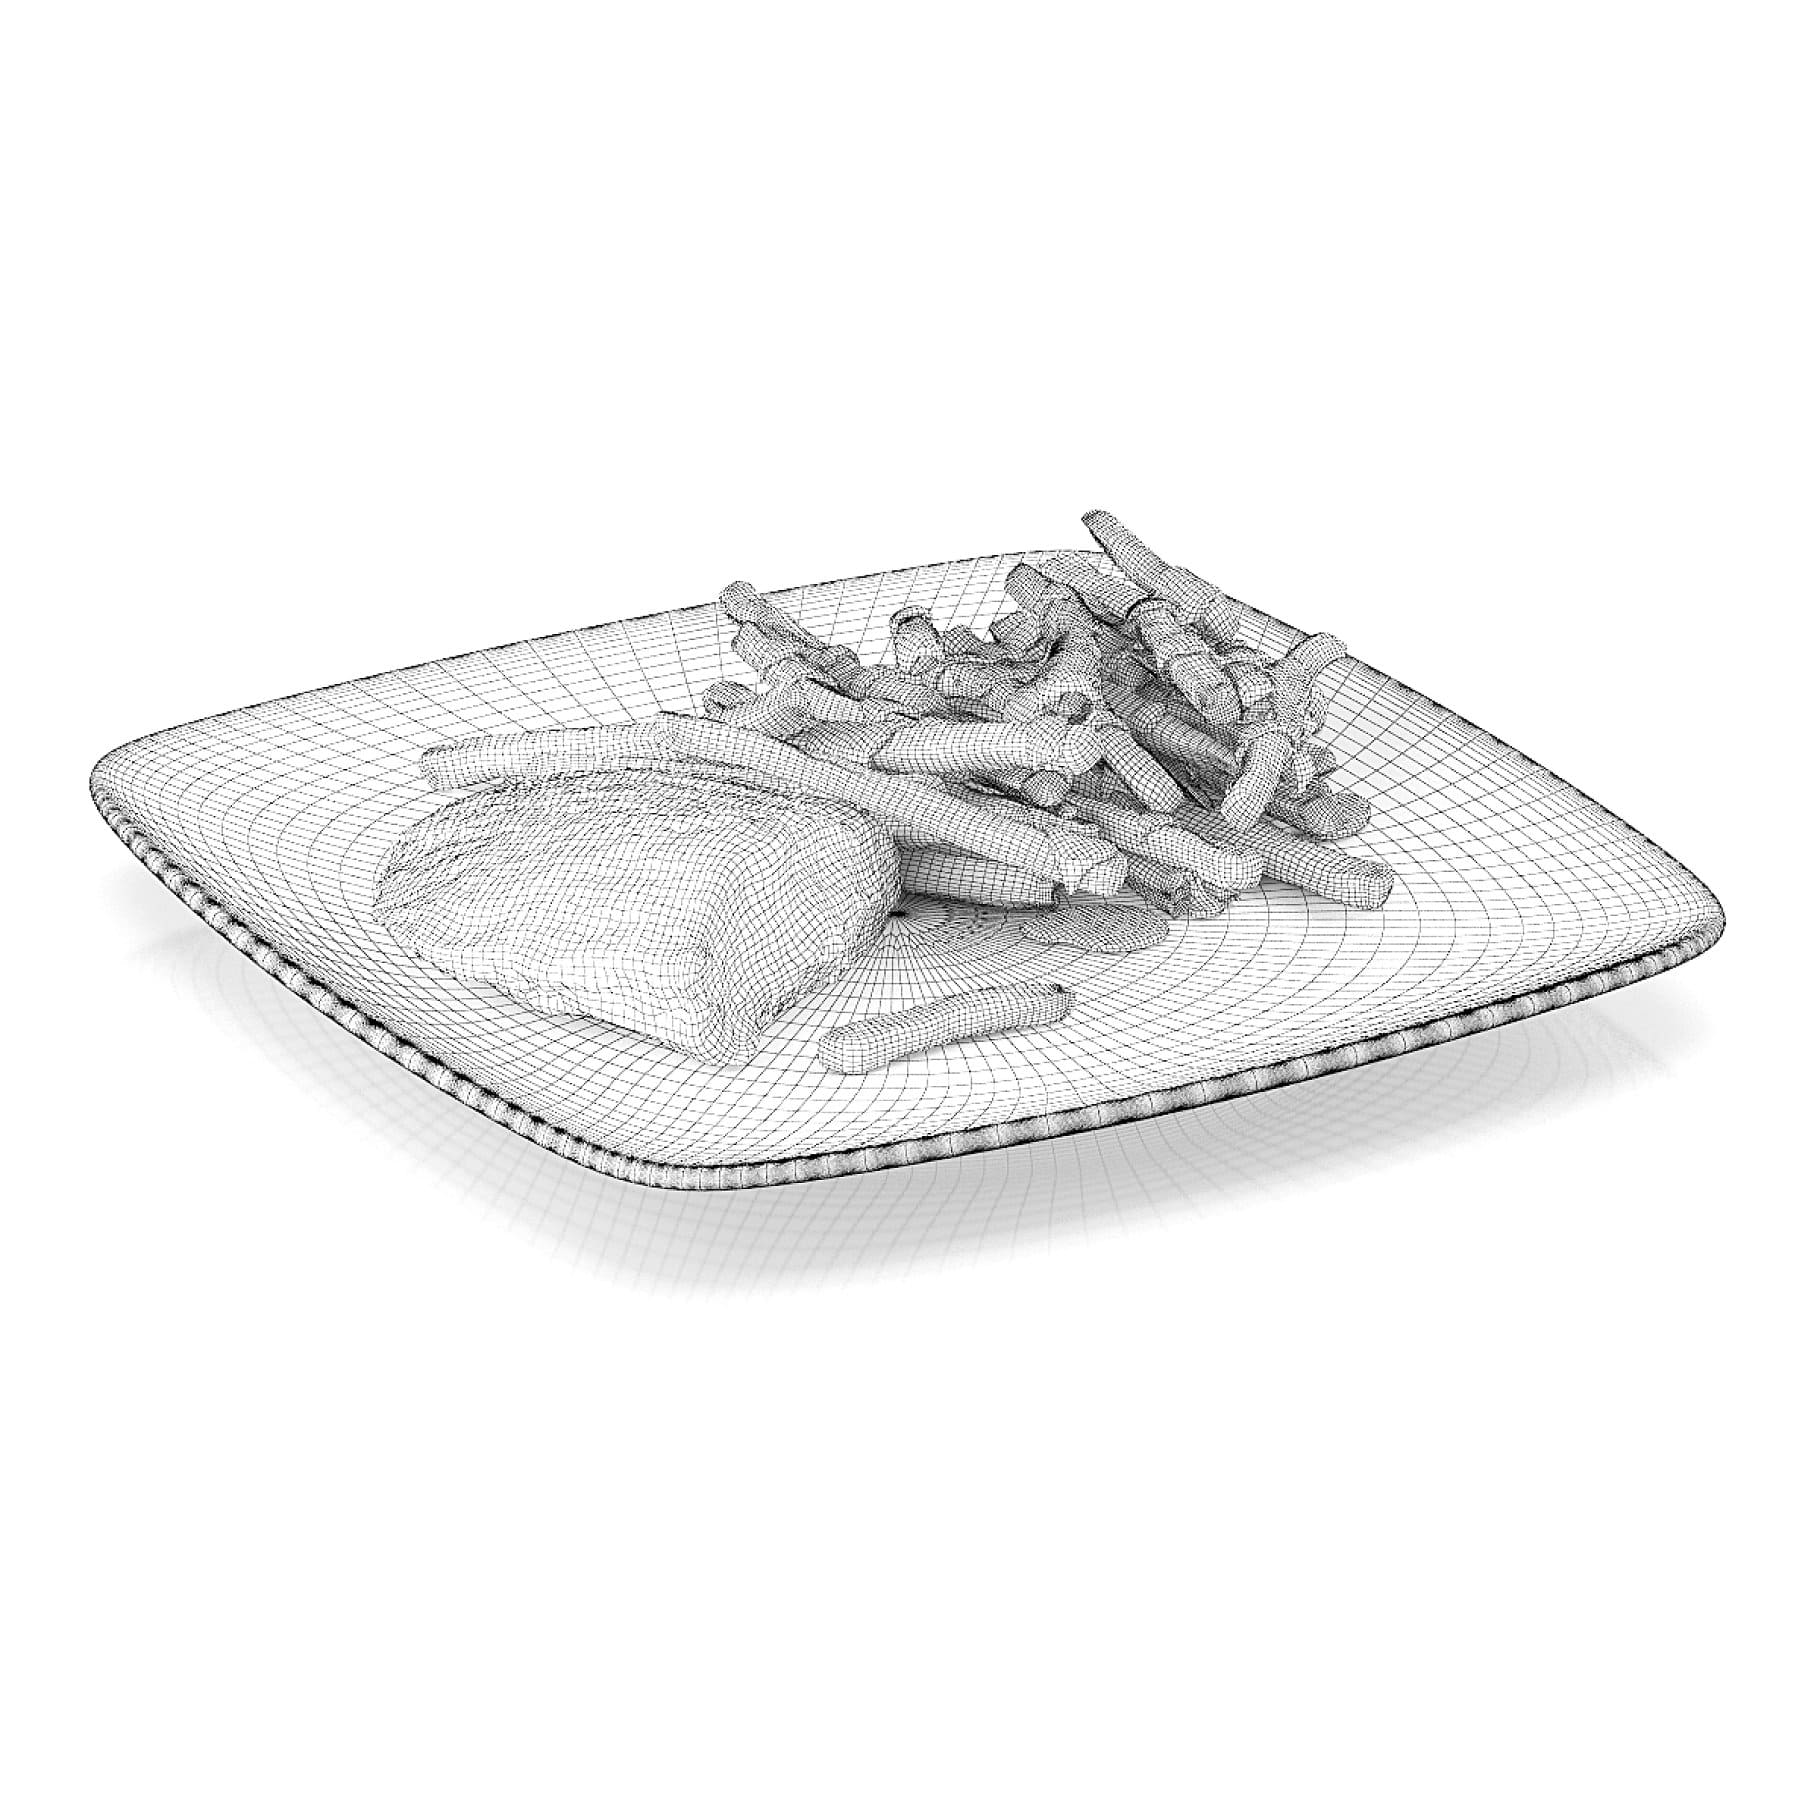 A drawn 3D model of Steak with French Fries.